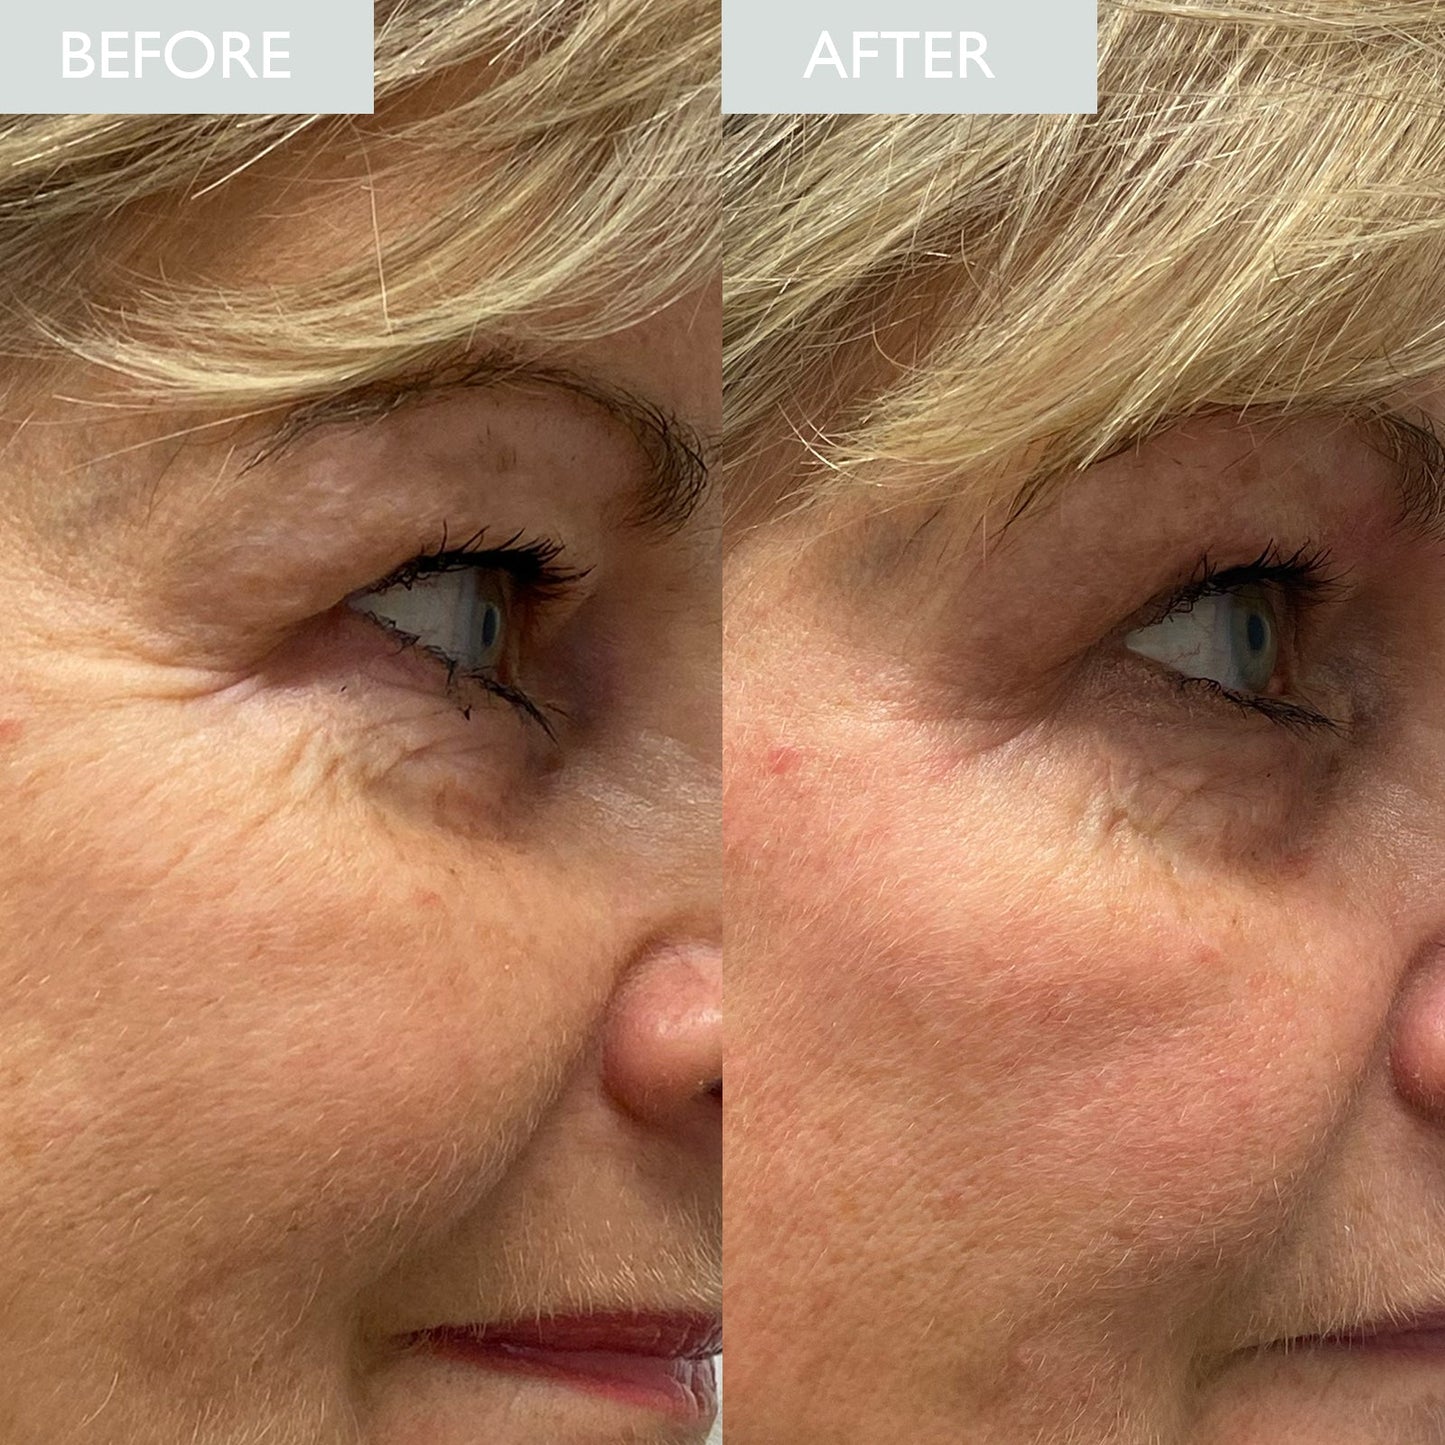 Woman showing before and after demonstrating a reduction in lines around eye area